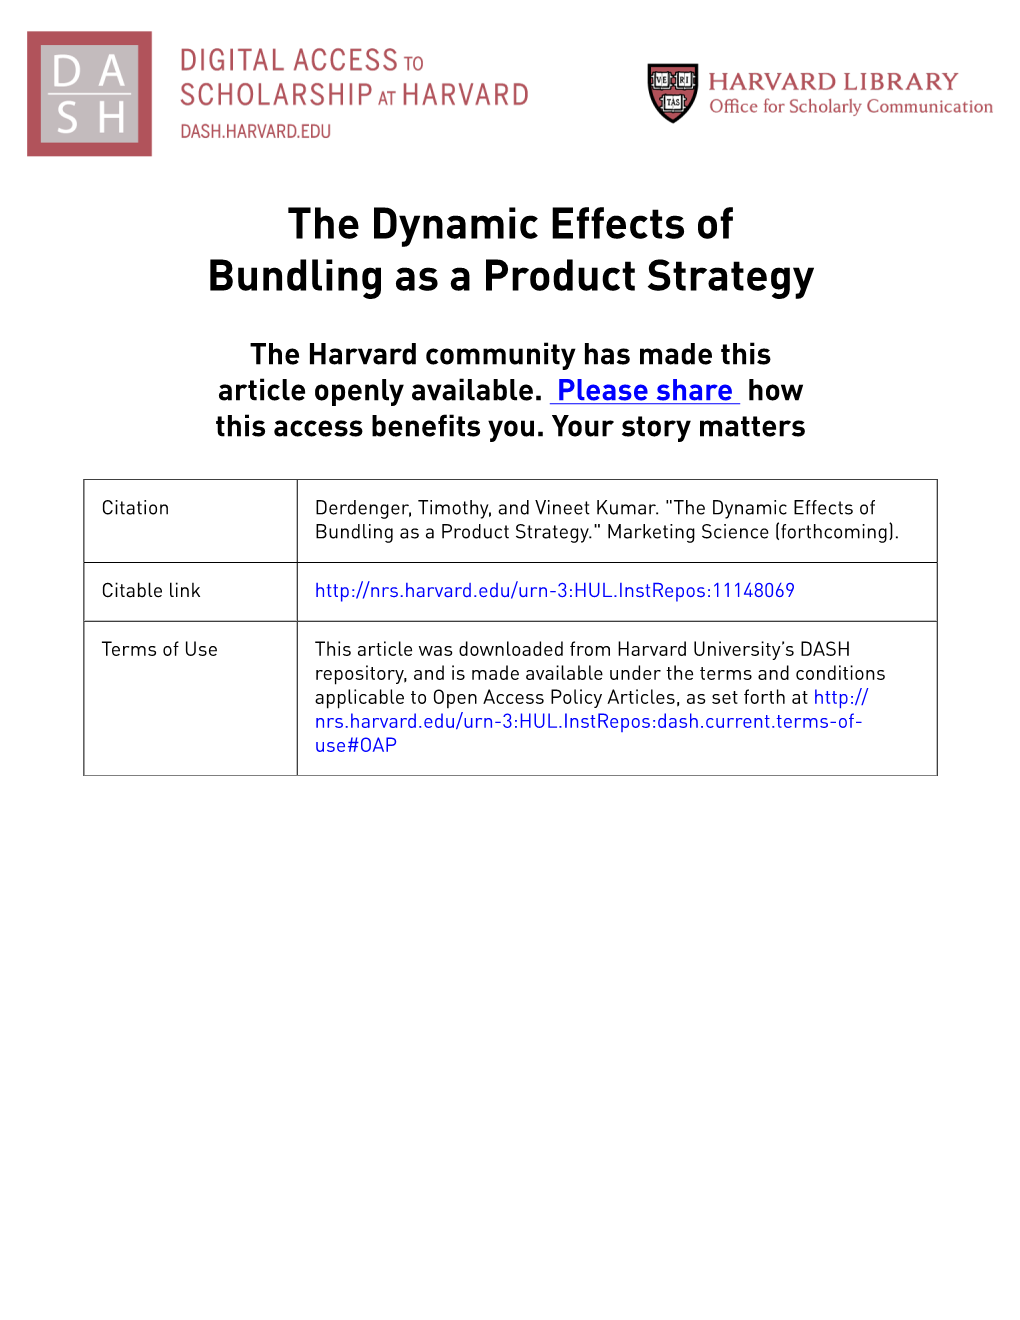 The Dynamic Effects of Bundling As a Product Strategy